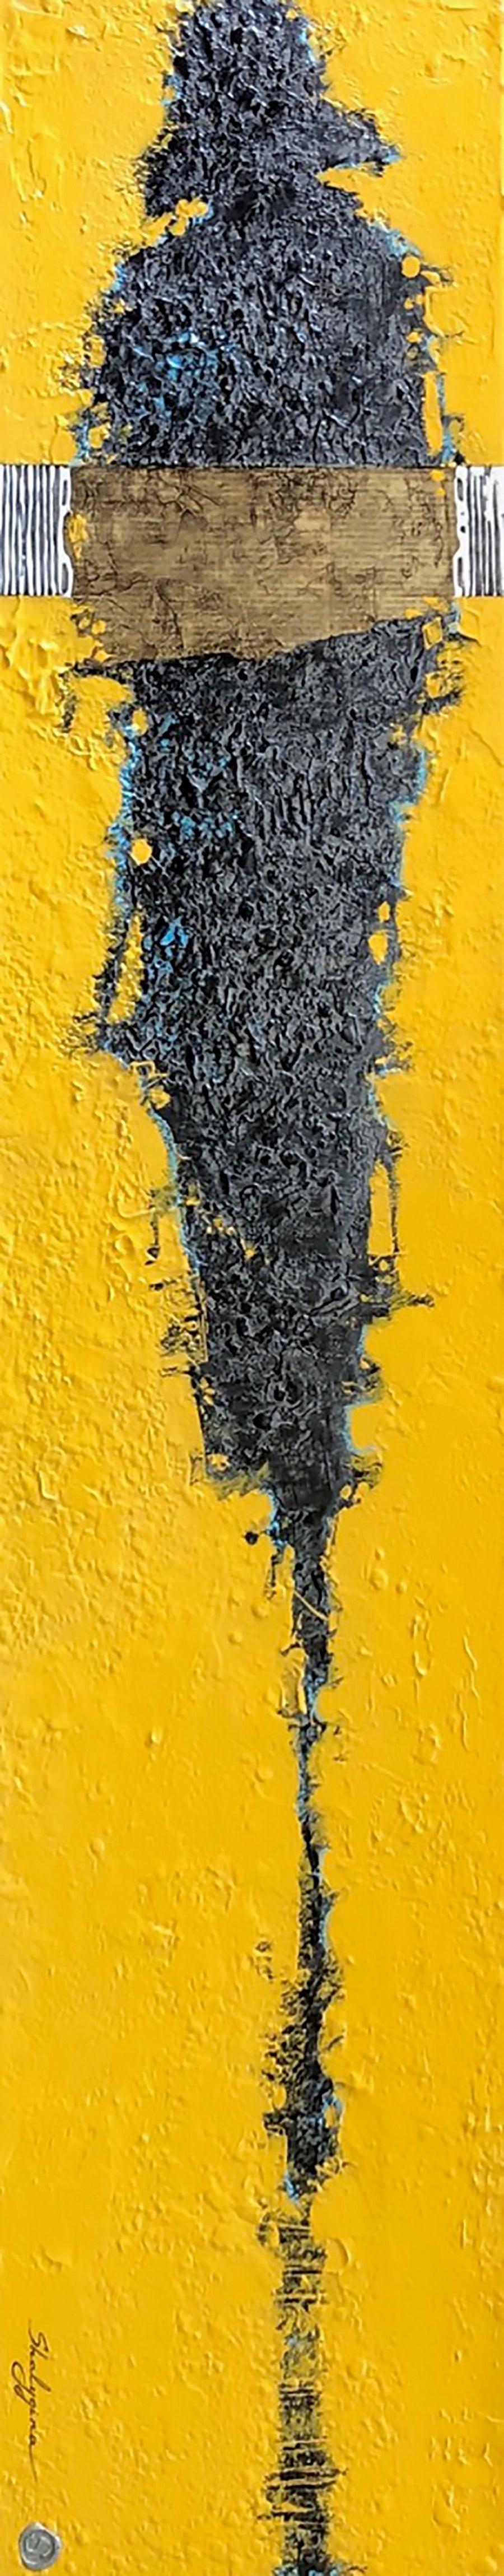 Yellow Gray Figure Contemporary Figurative Abstract Painting Mixed Media 60x12